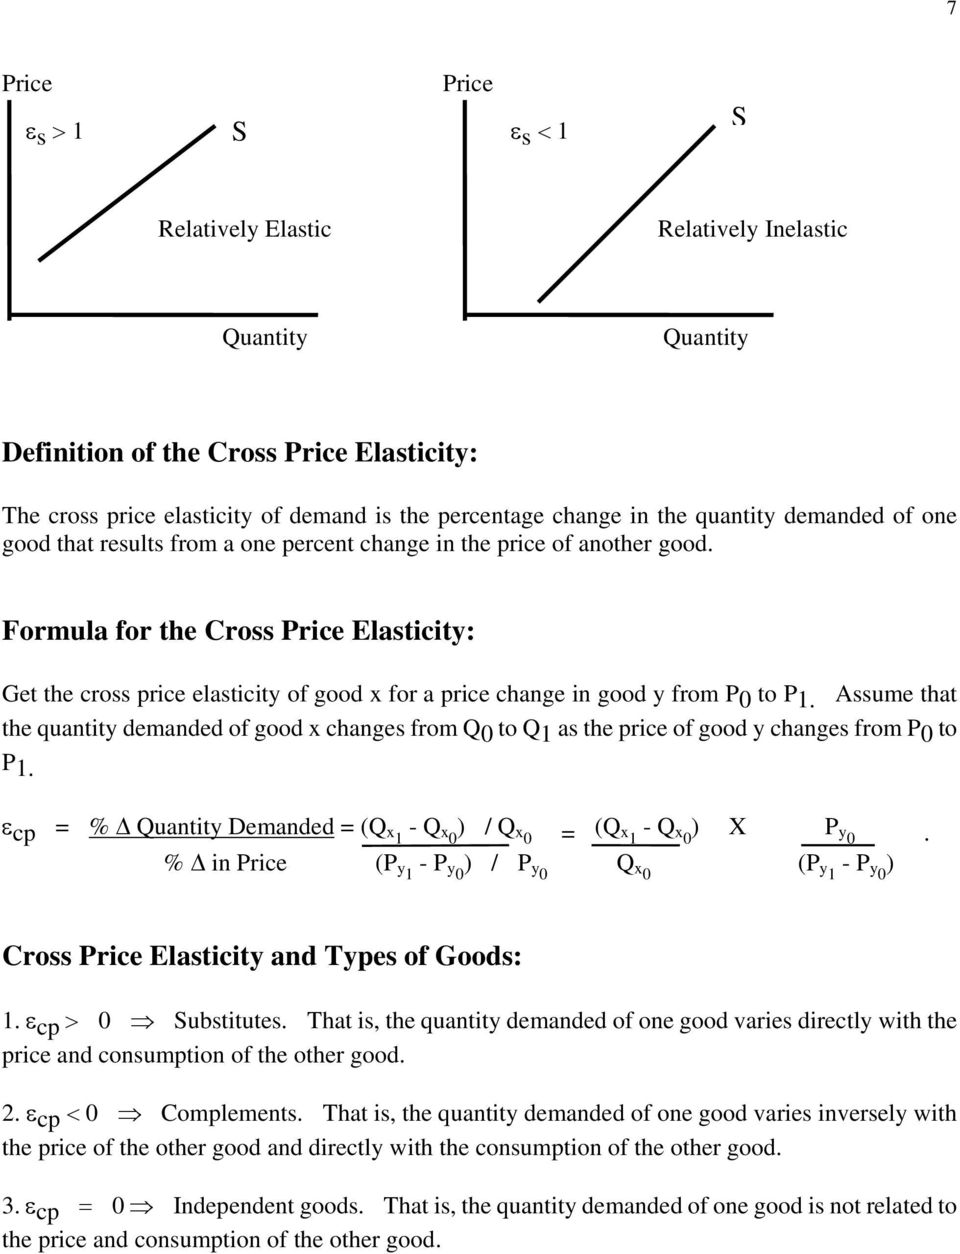 Assume that the quantity demanded of good x changes from Q 0 to Q 1 as the price of good y changes from P 0 to P 1. ε cp = % Δ emanded = (Q x1 - Q x0 ) / Q x0 = (Q x1 - Q x0 ) X P y0.